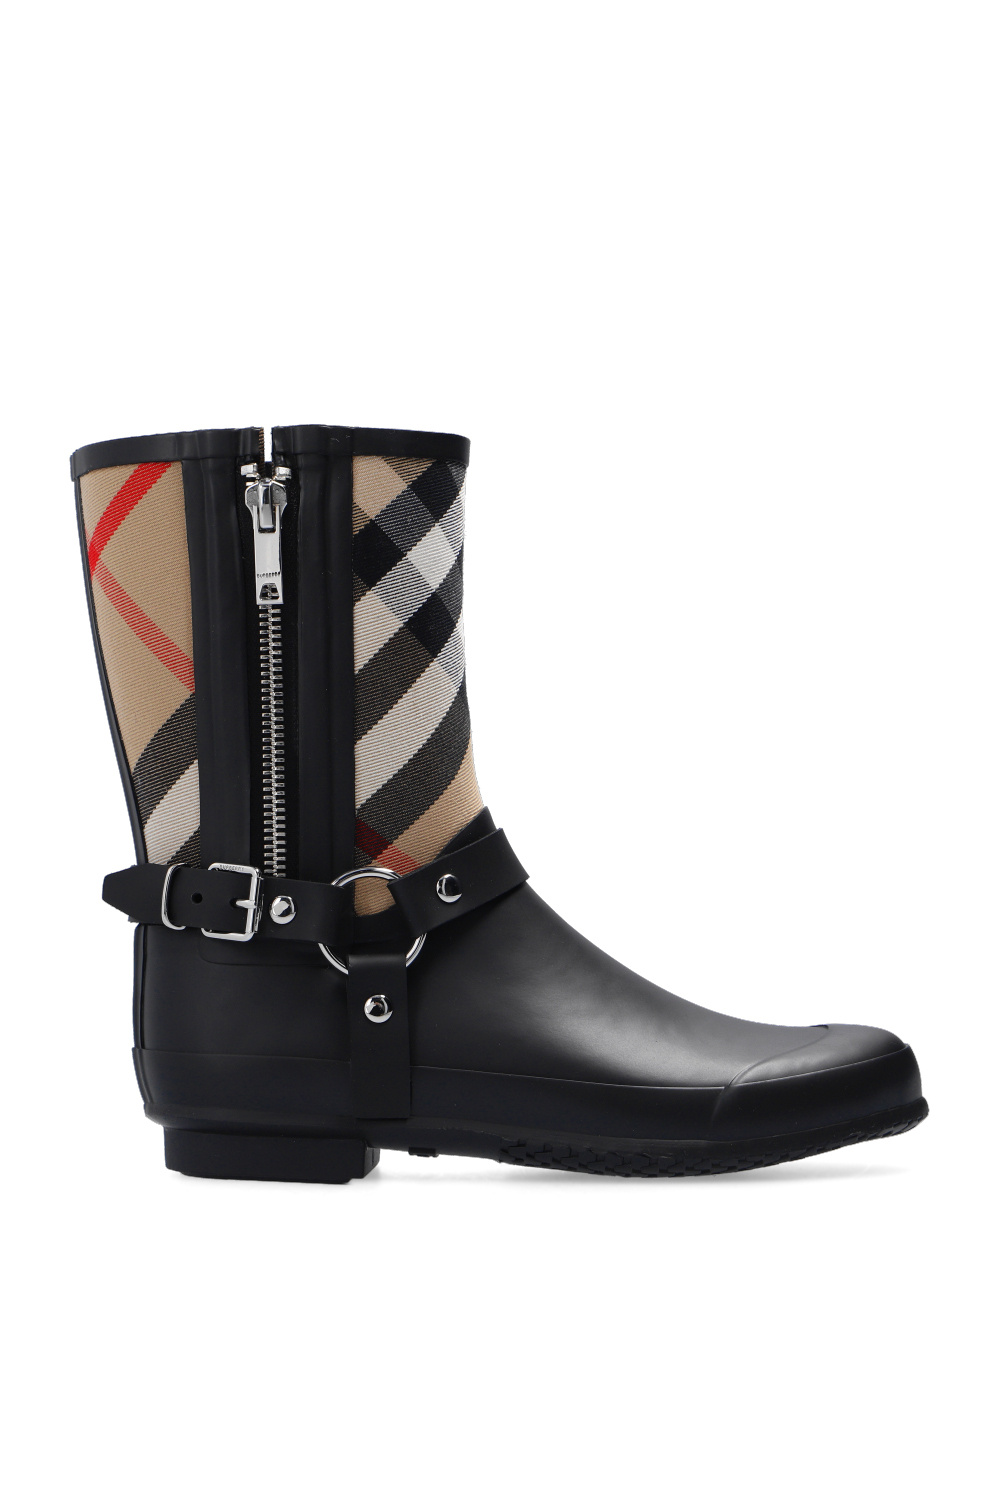 burberry swimsuit ‘House Check’ rain boots